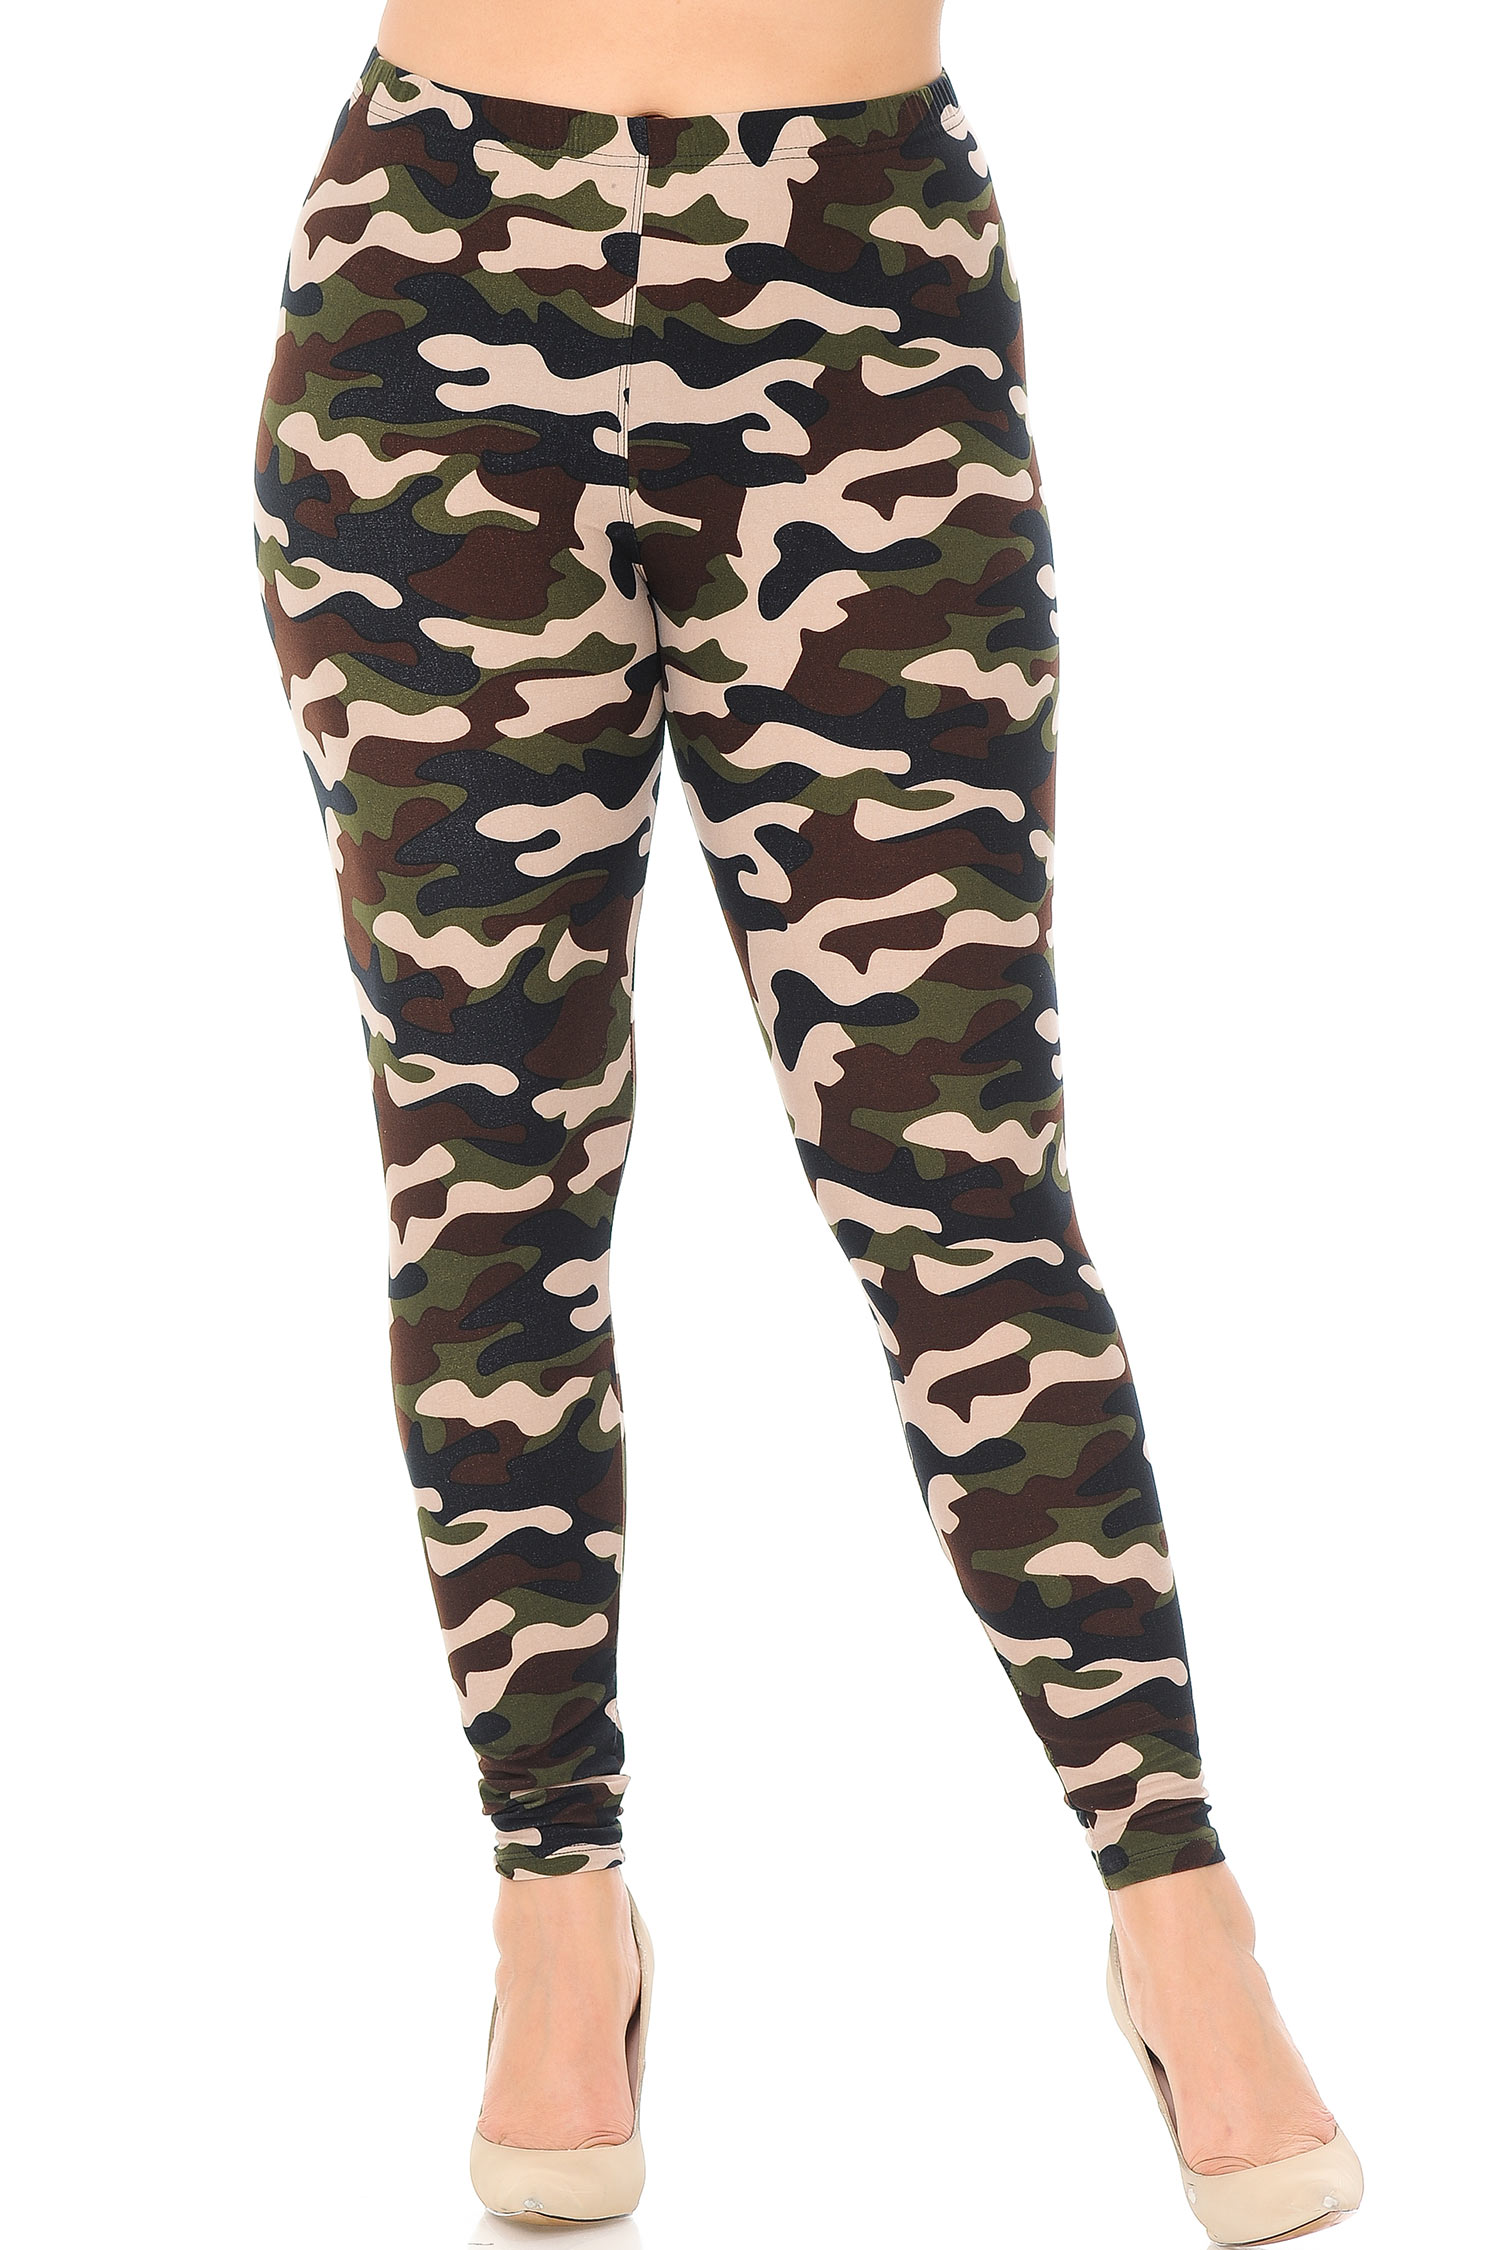 Wholesale Buttery Smooth Flirty Camouflage Plus Size Leggings